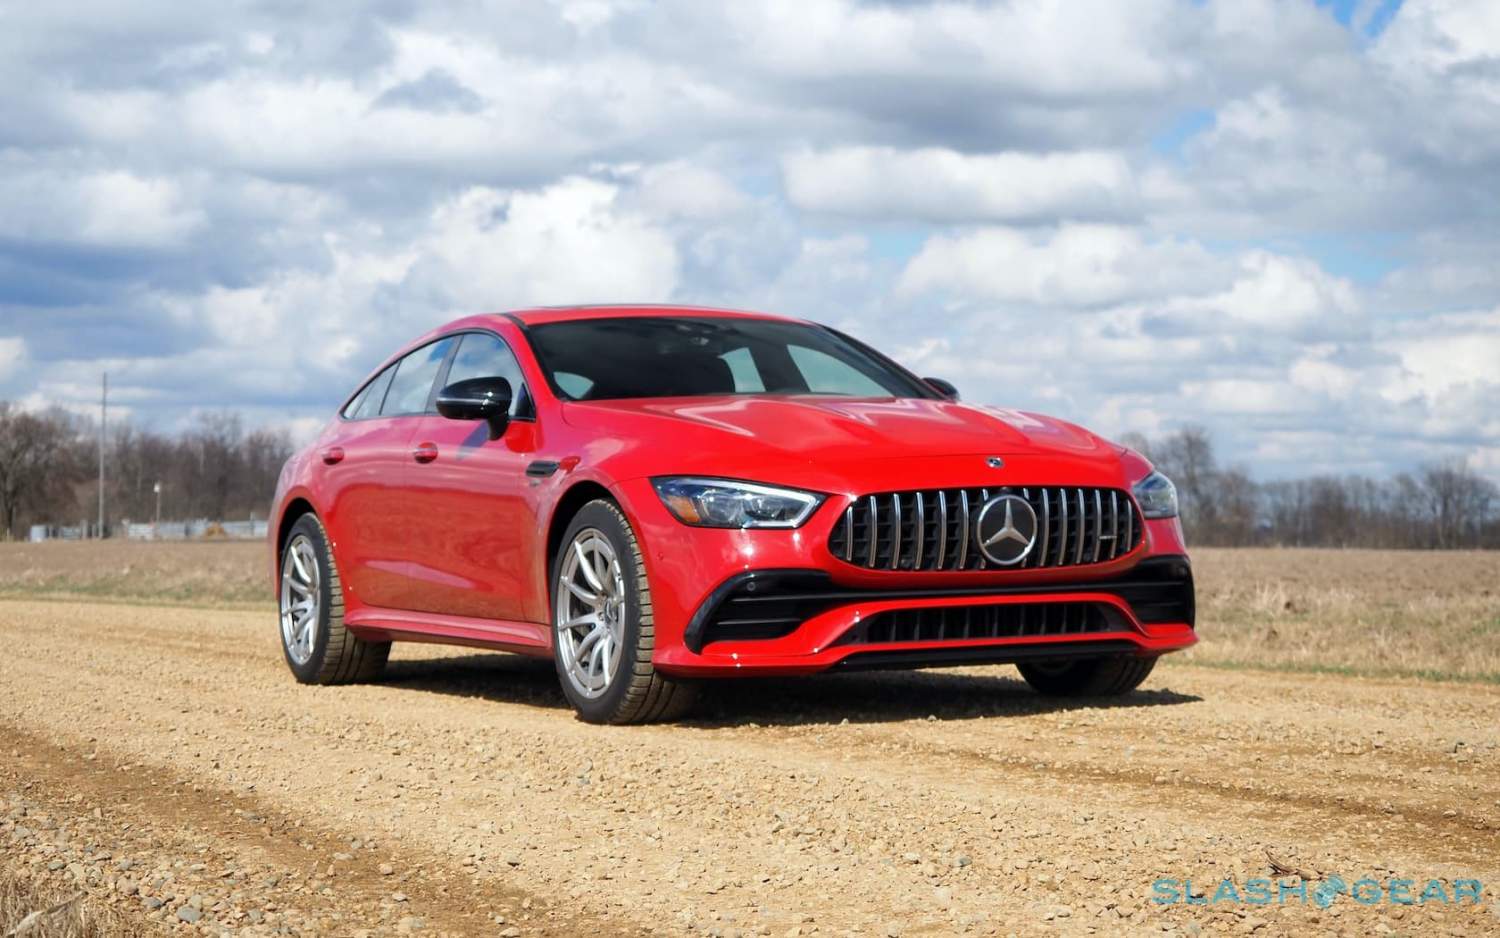 21 Mercedes Amg Gt 43 4 Door Coupe Review The Charm Of Choice Slashgear